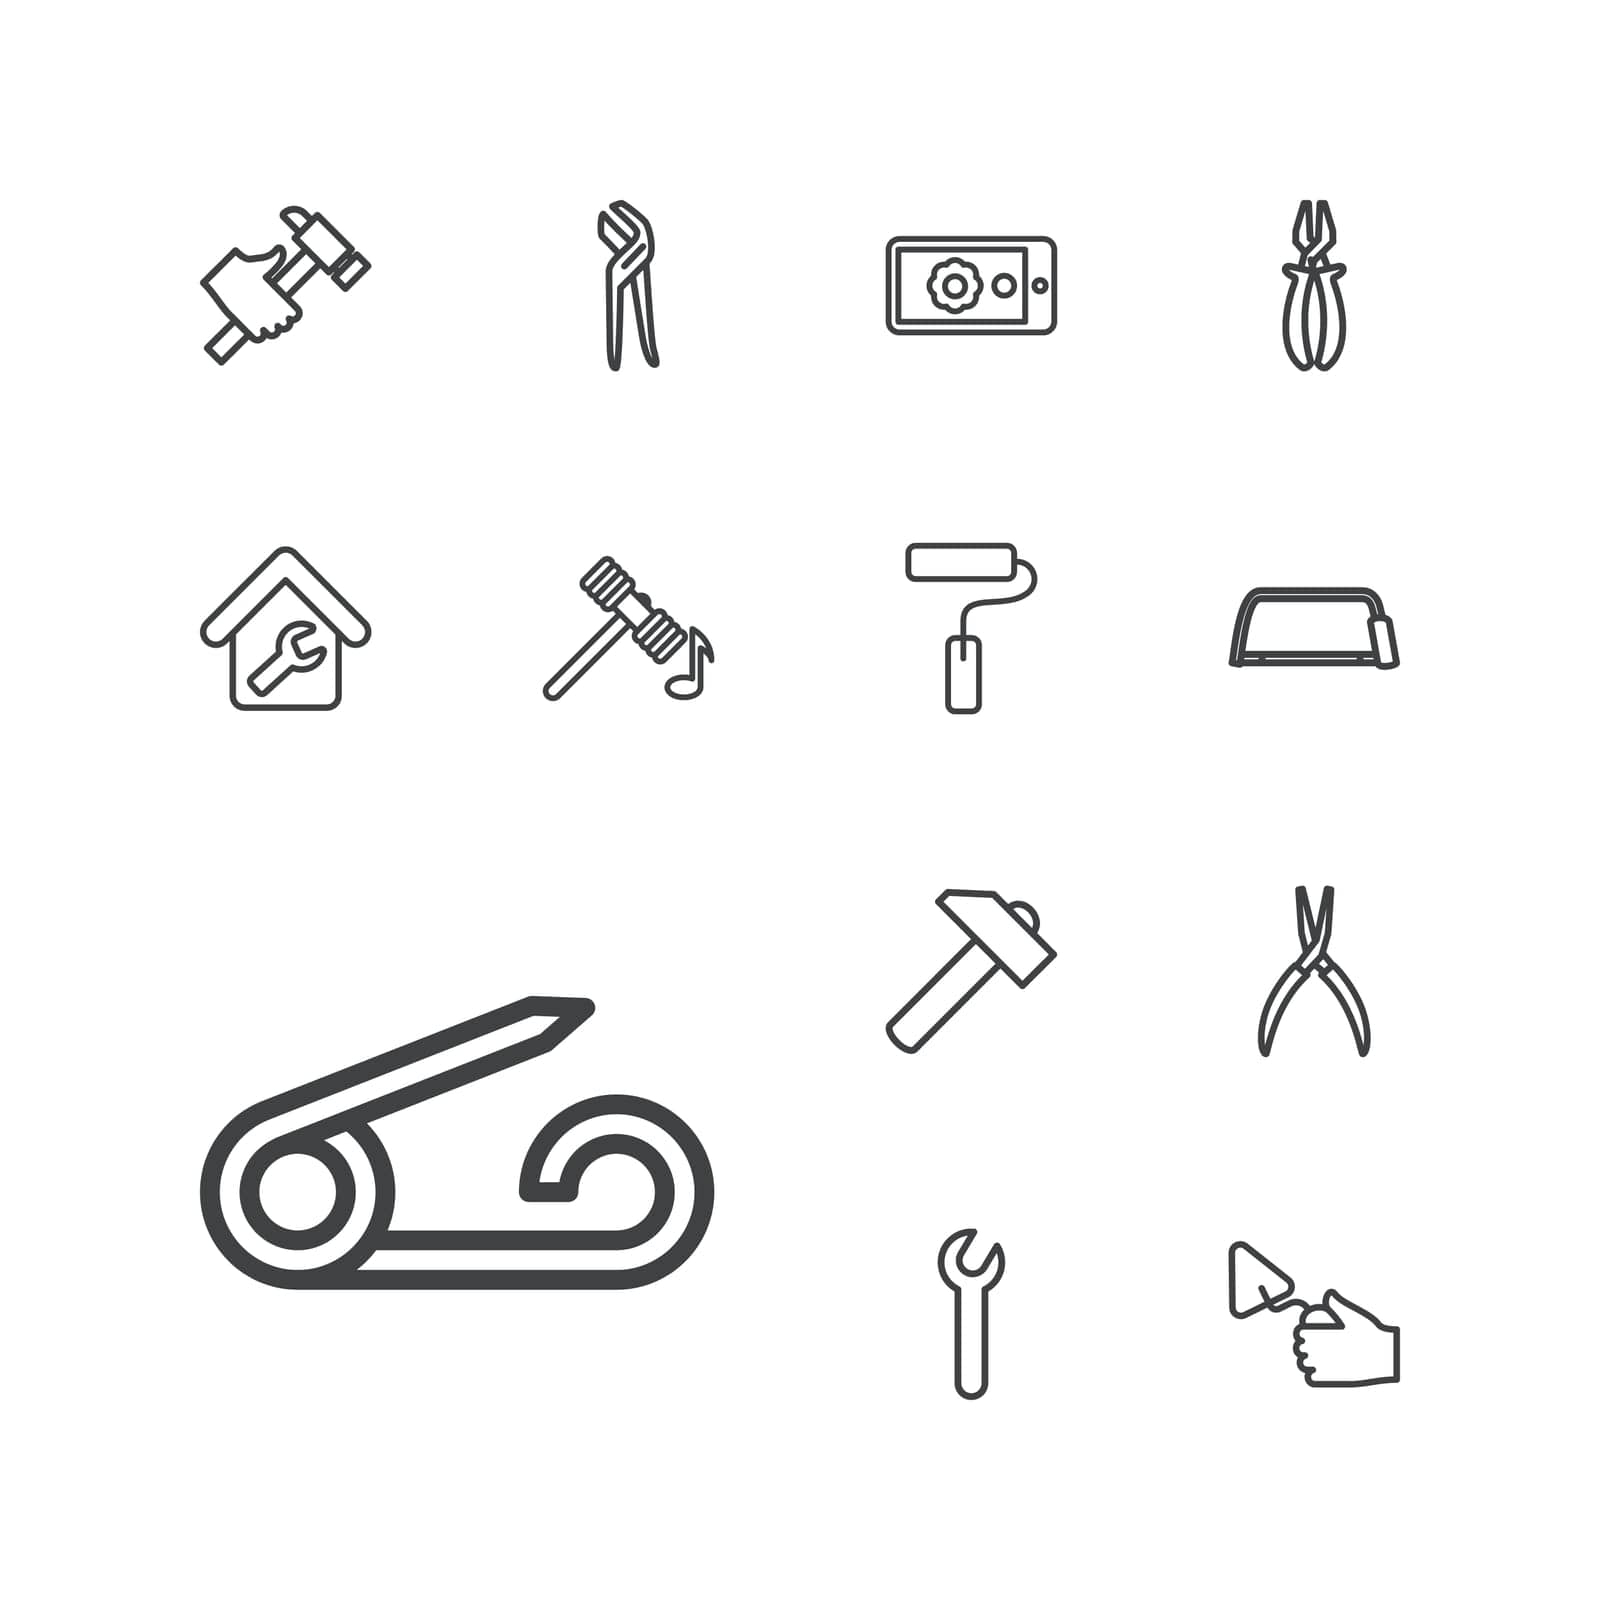 symbol,repair,hummer,hammer,concept,icon,sign,isolated,paint,instrument,industry,pin,white,fix,web,flat,design,pliers,construction,vector,hacksaw,graphic,hand,element,hardware,on,trowel,set,work,display,metal,equipment,tool,home,wrench,background,service,silhouette,illustration,roller,object,gear by ogqcorp